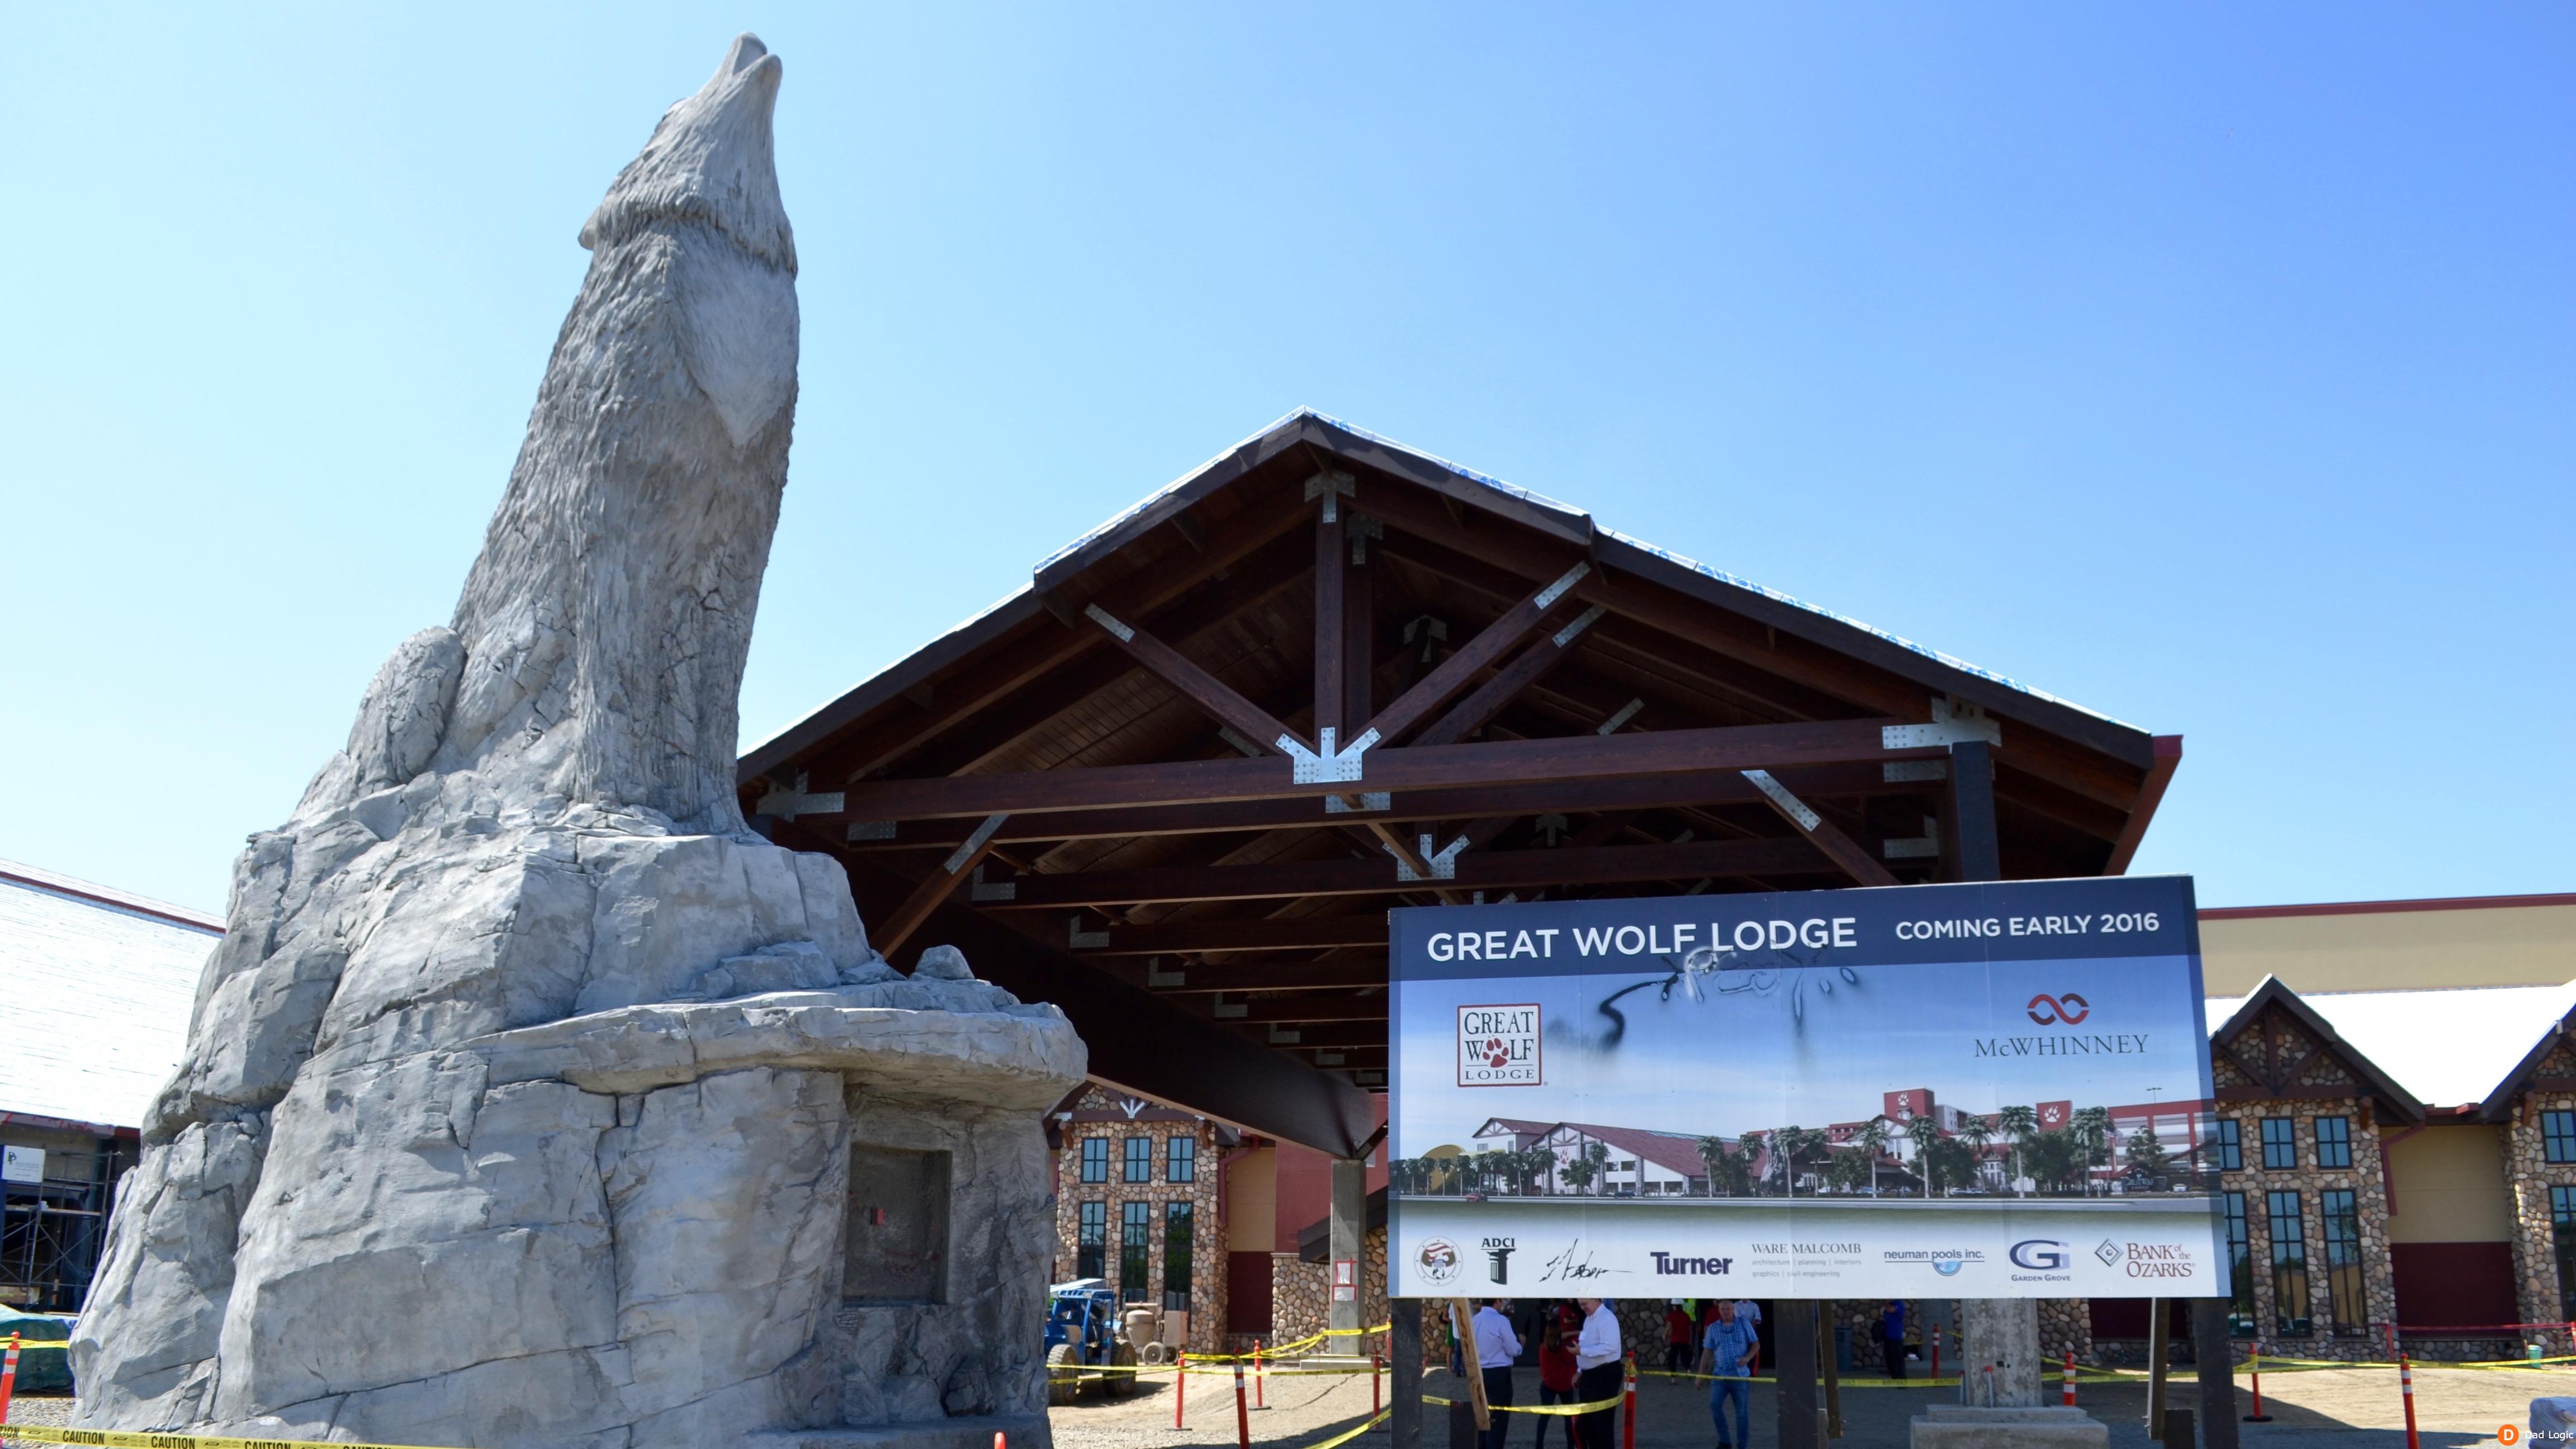 Great Wolf Lodge Southern California Opens in March 2016 (Construction Photos) - Dad Logic4608 x 2592